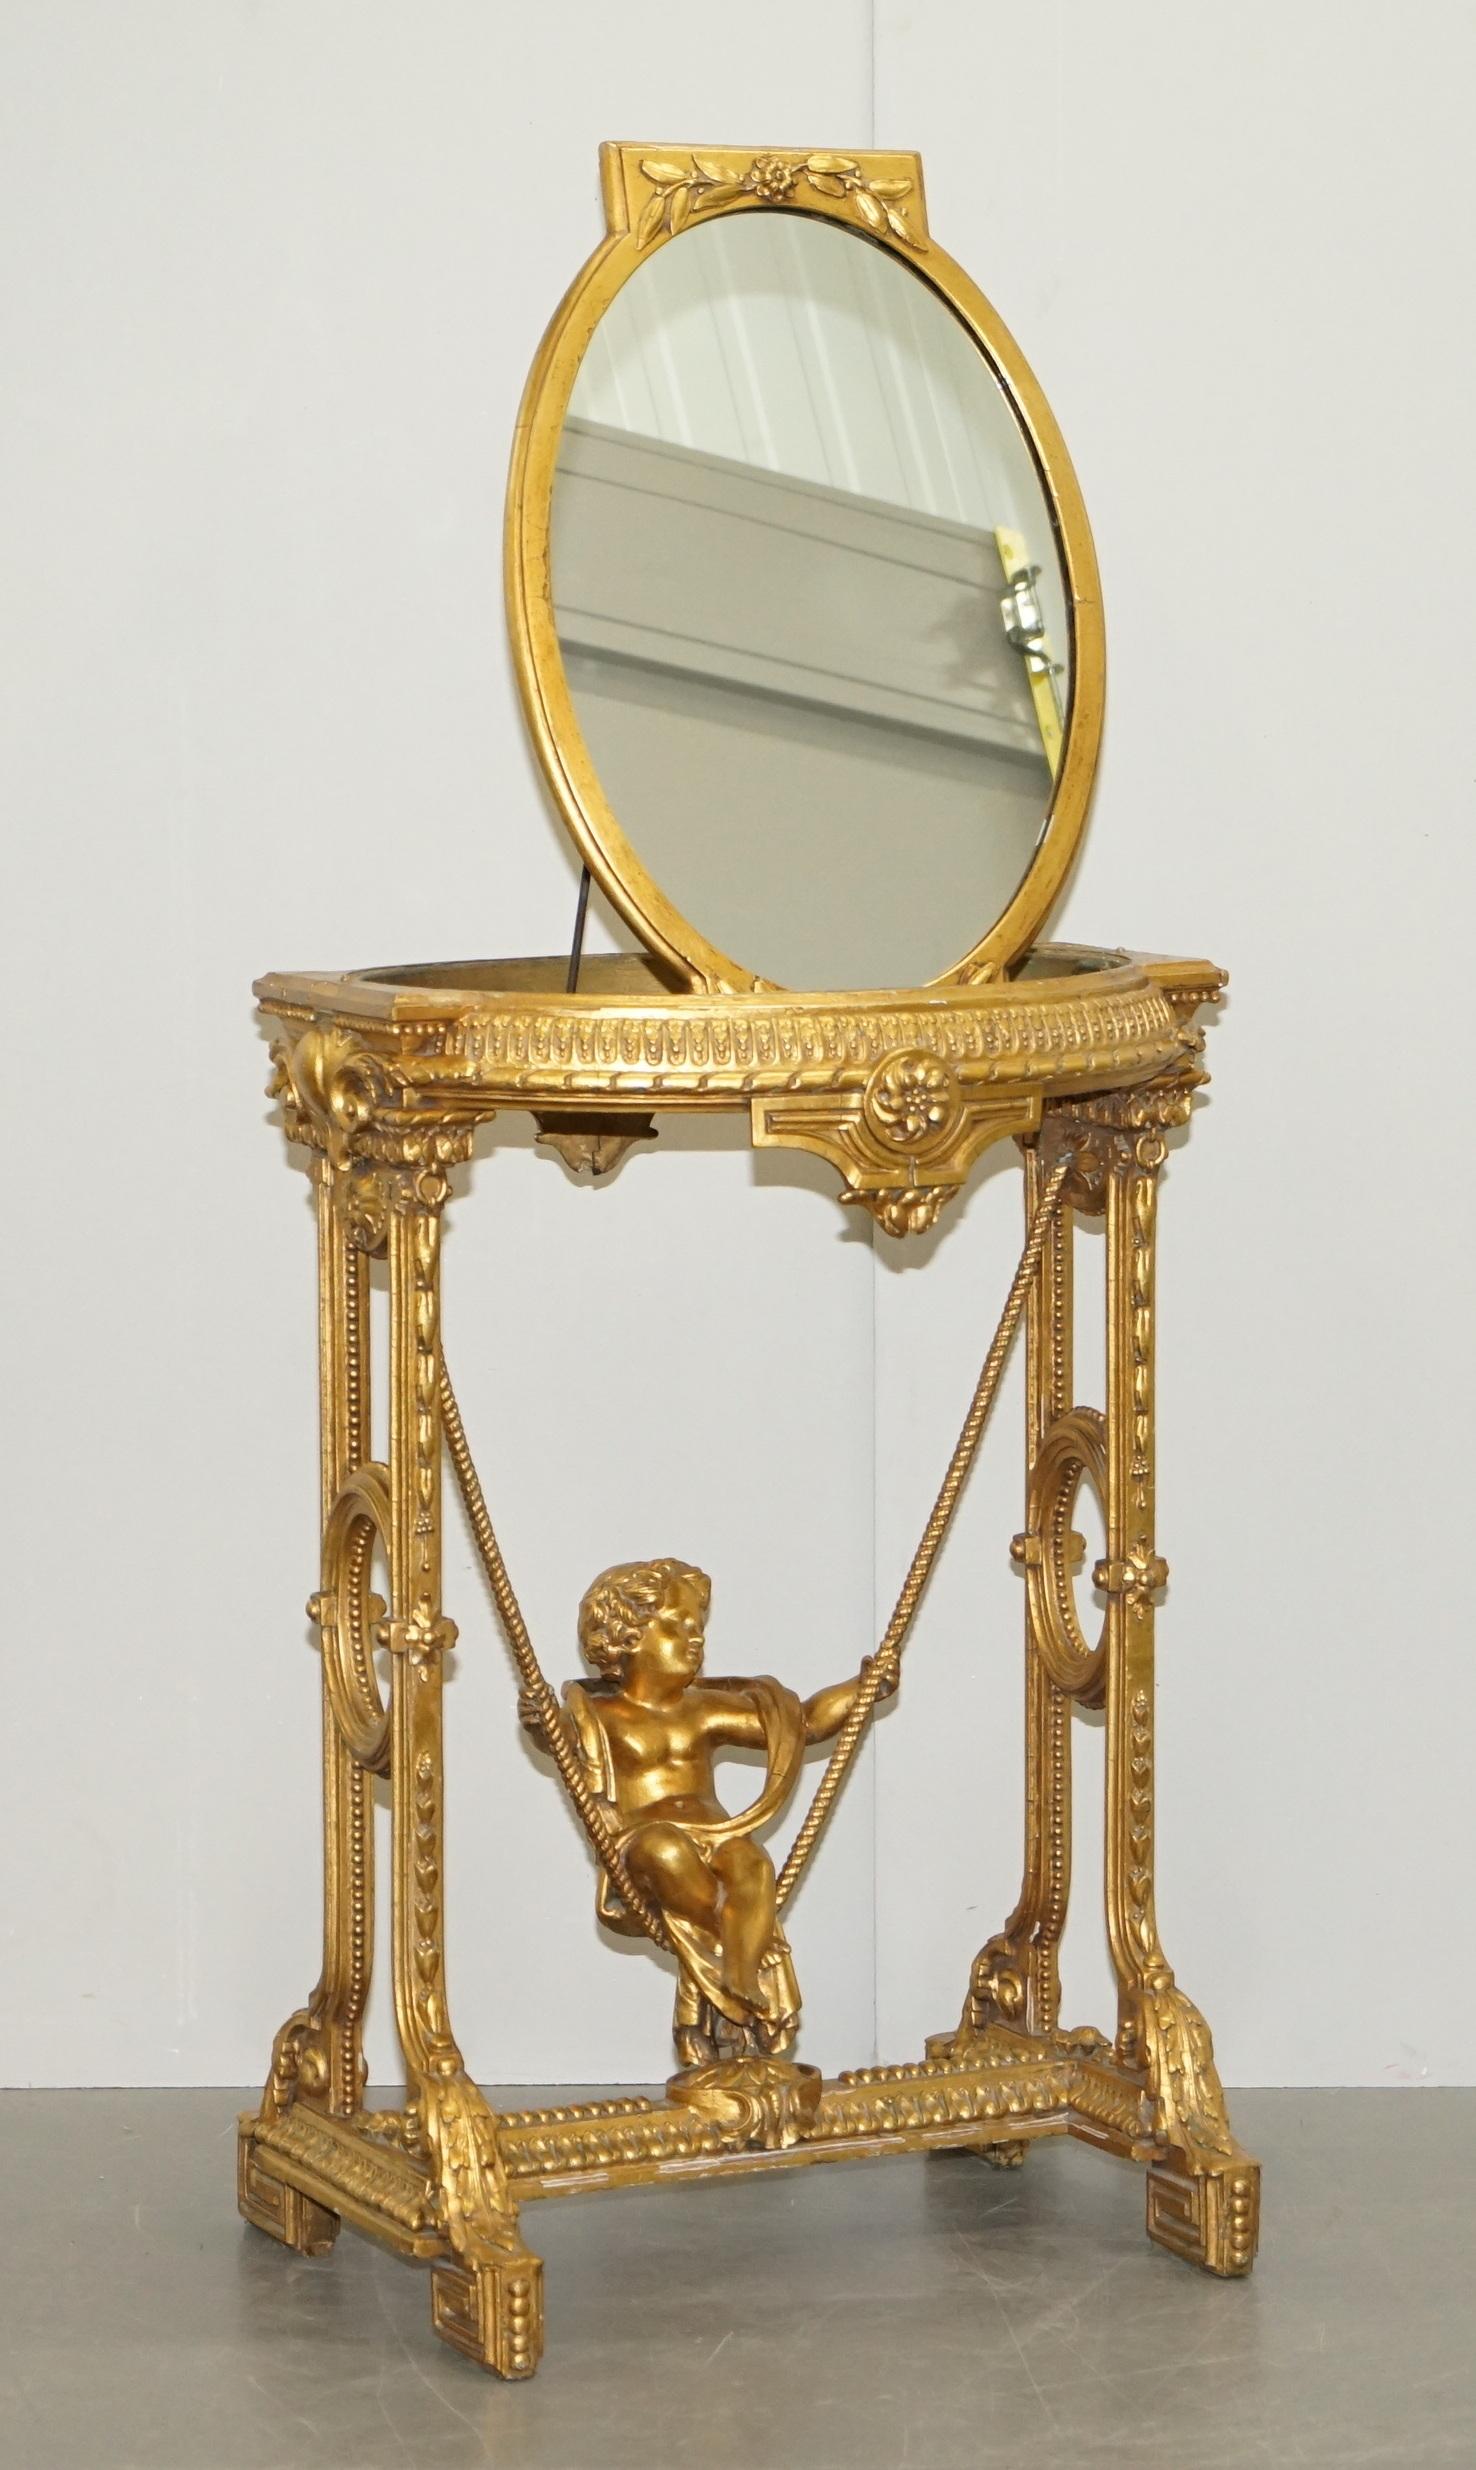 We are delighted to offer for sale this lovely circa 1920s gold giltwood gesso occasional table with mirror top and putti on swing base

A lovely piece, this commands attention in any setting, it has such a feeling of life and innocent pleasure.